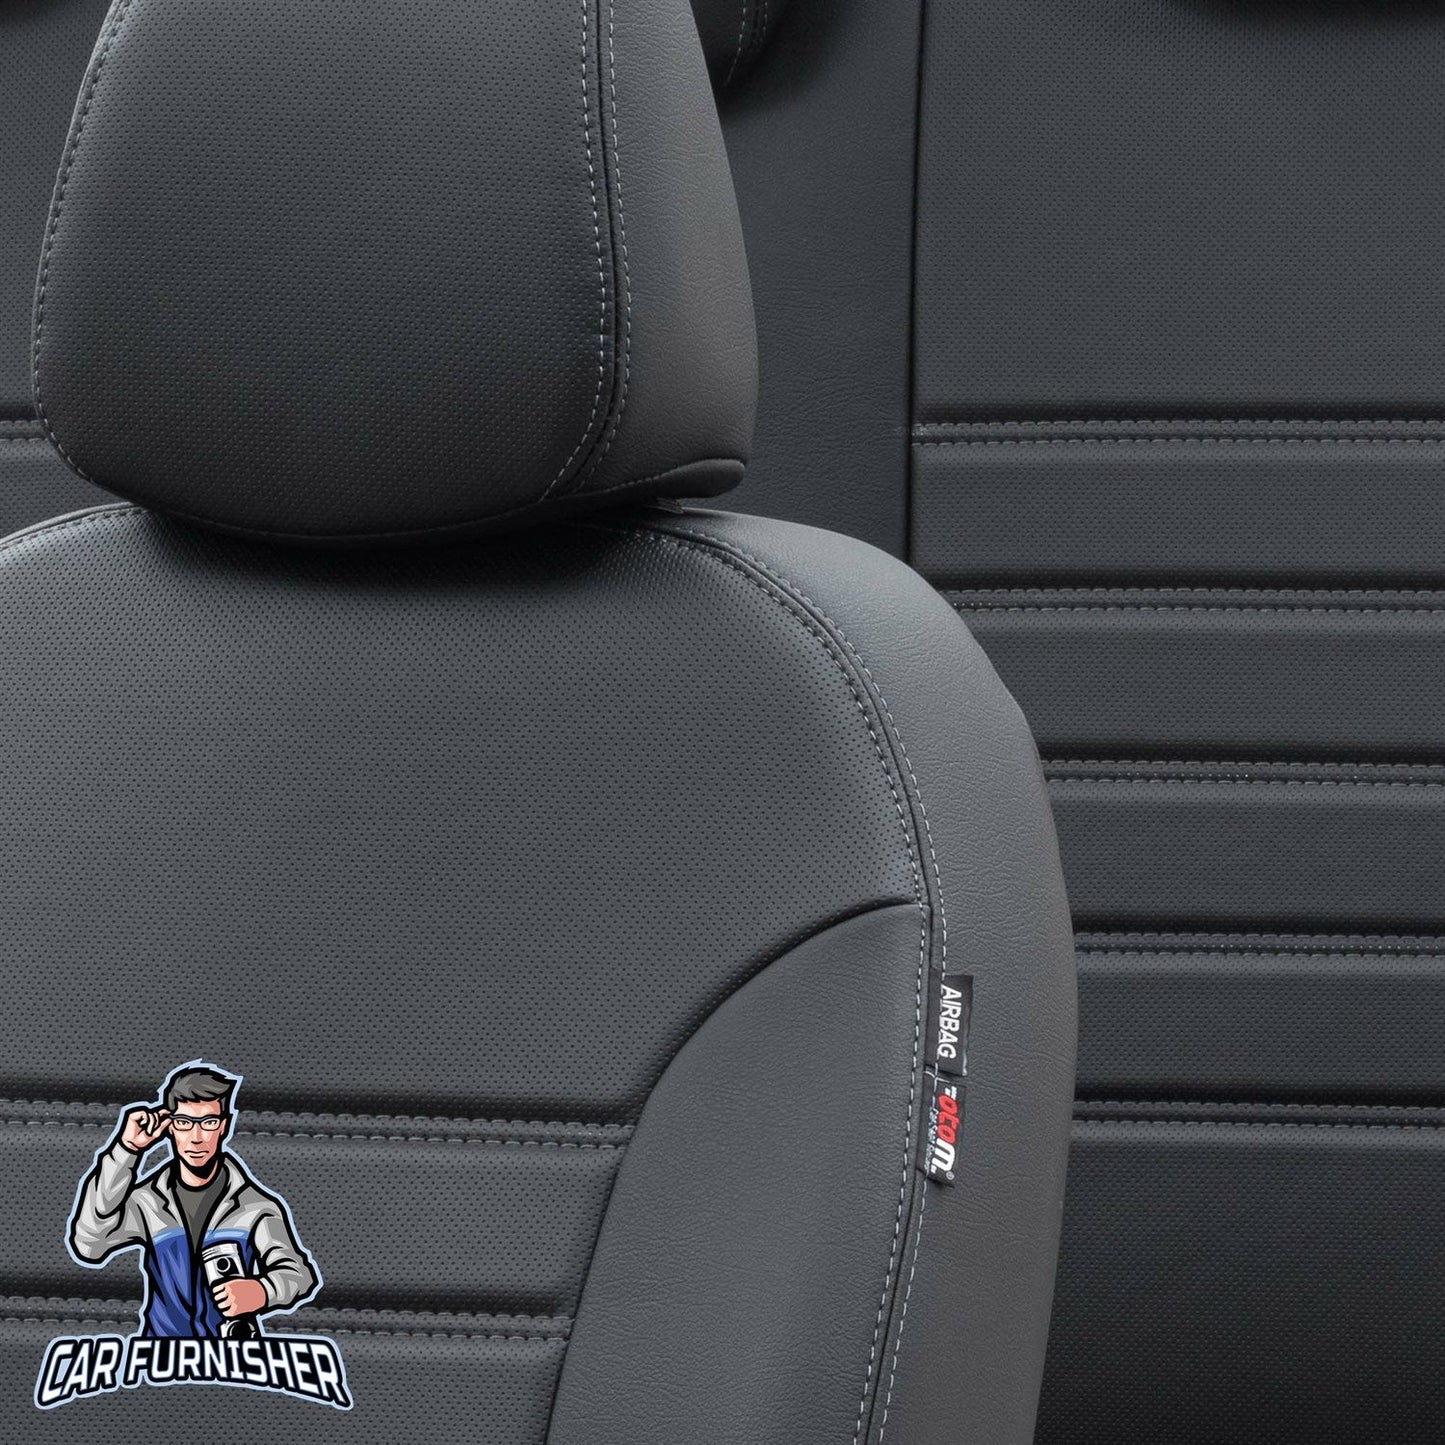 Toyota Auris Seat Cover Istanbul Leather Design Black Leather